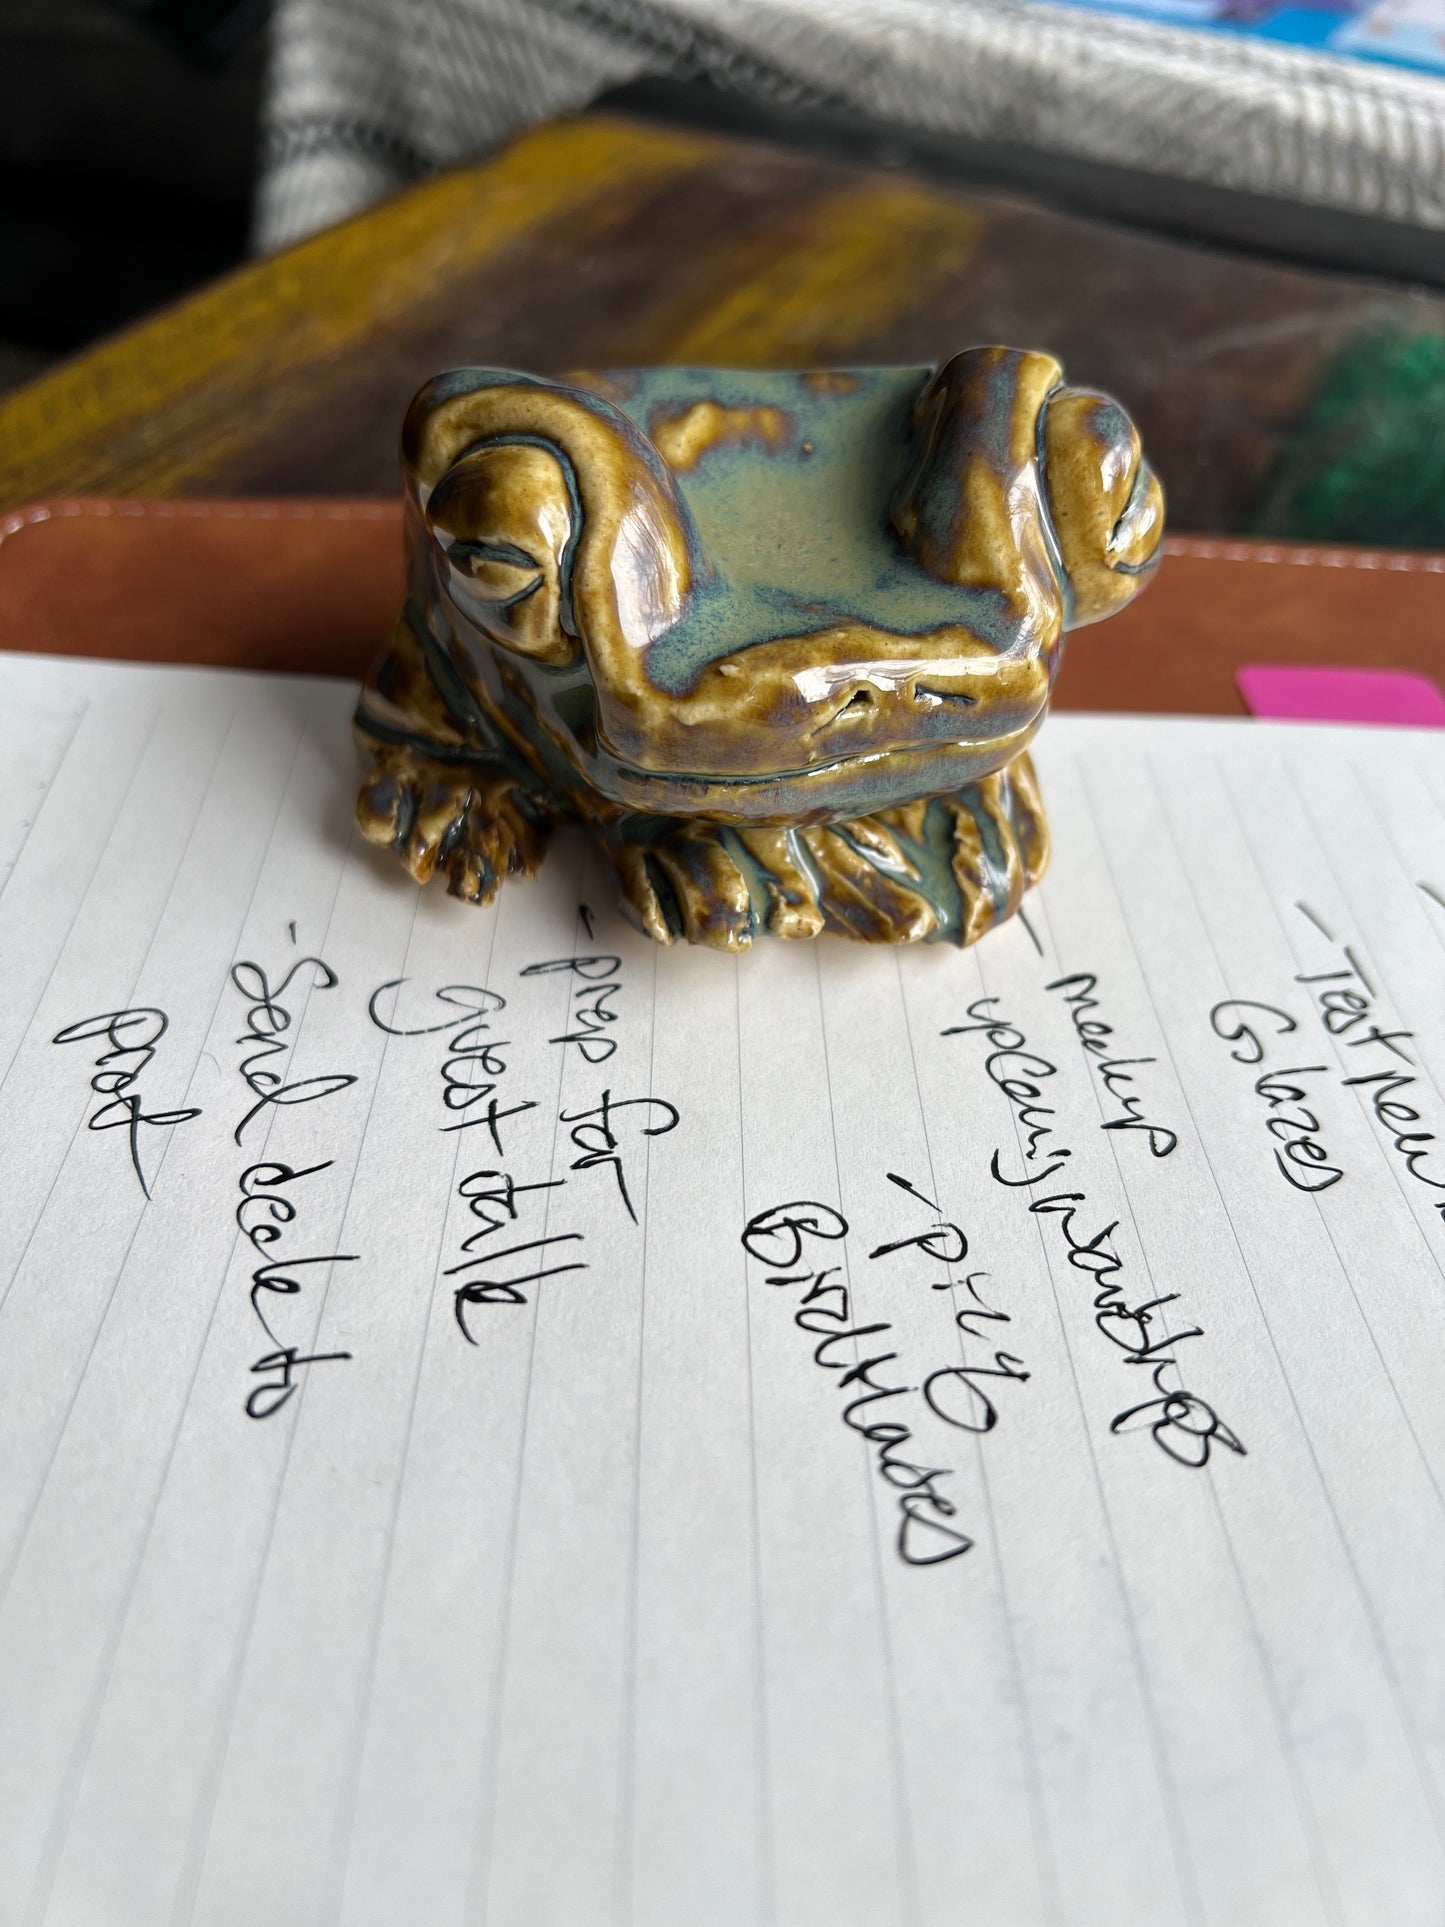 Leap Day: $45 Chonky Frogs All-Included Ceramics Workshop